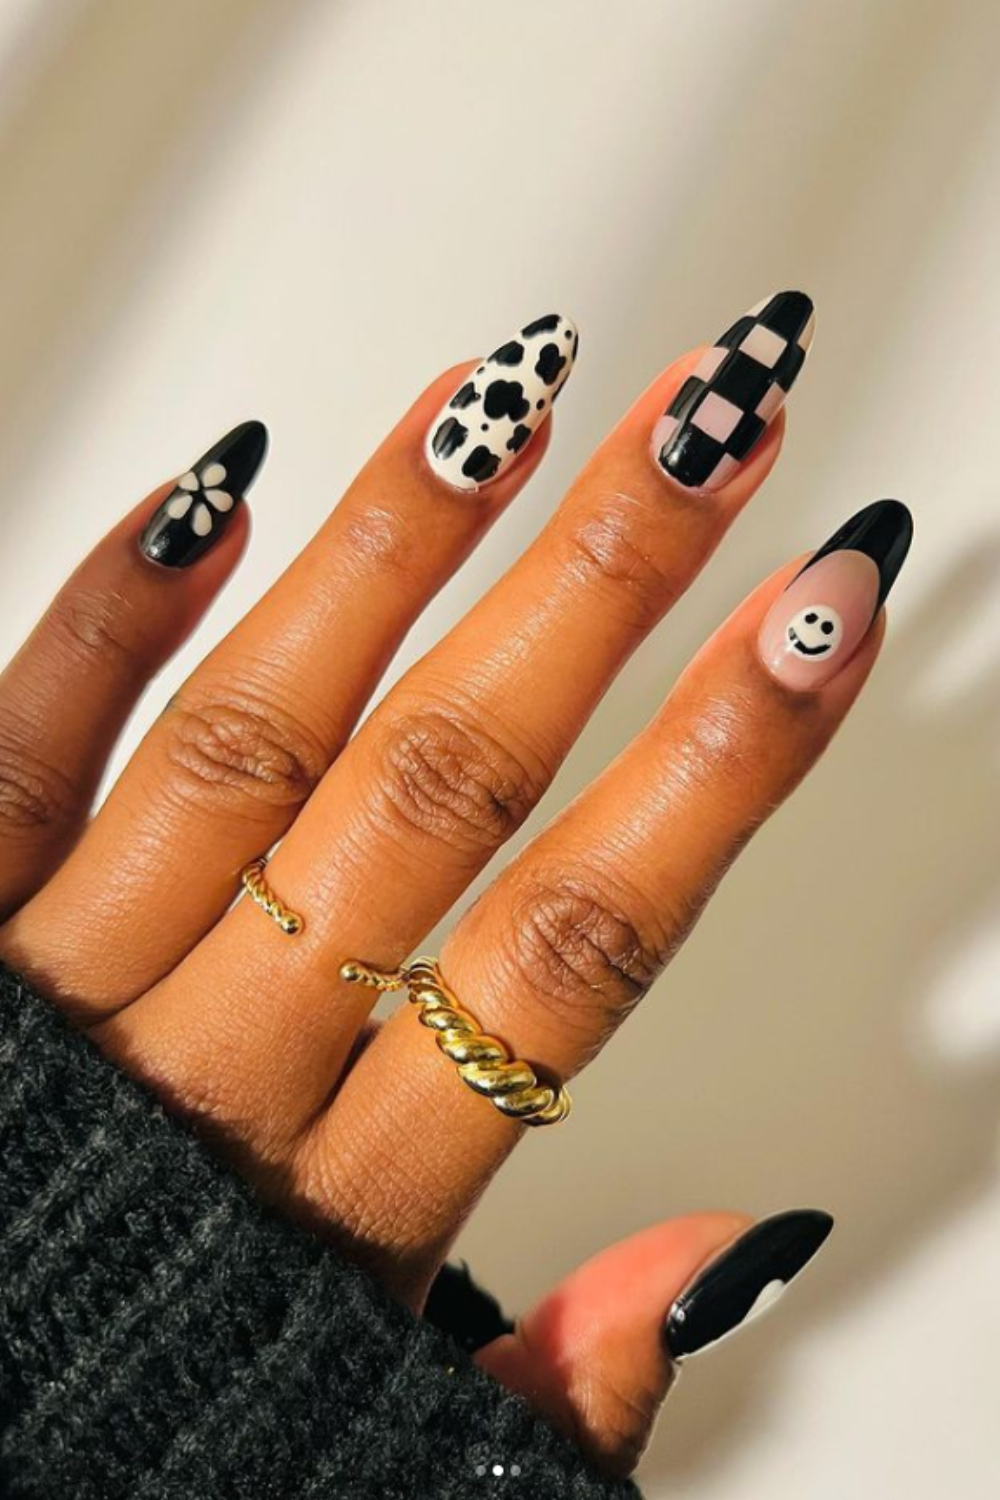 11 Minimalist Manicures To Get That Clean Girl Aesthetic - Elle India